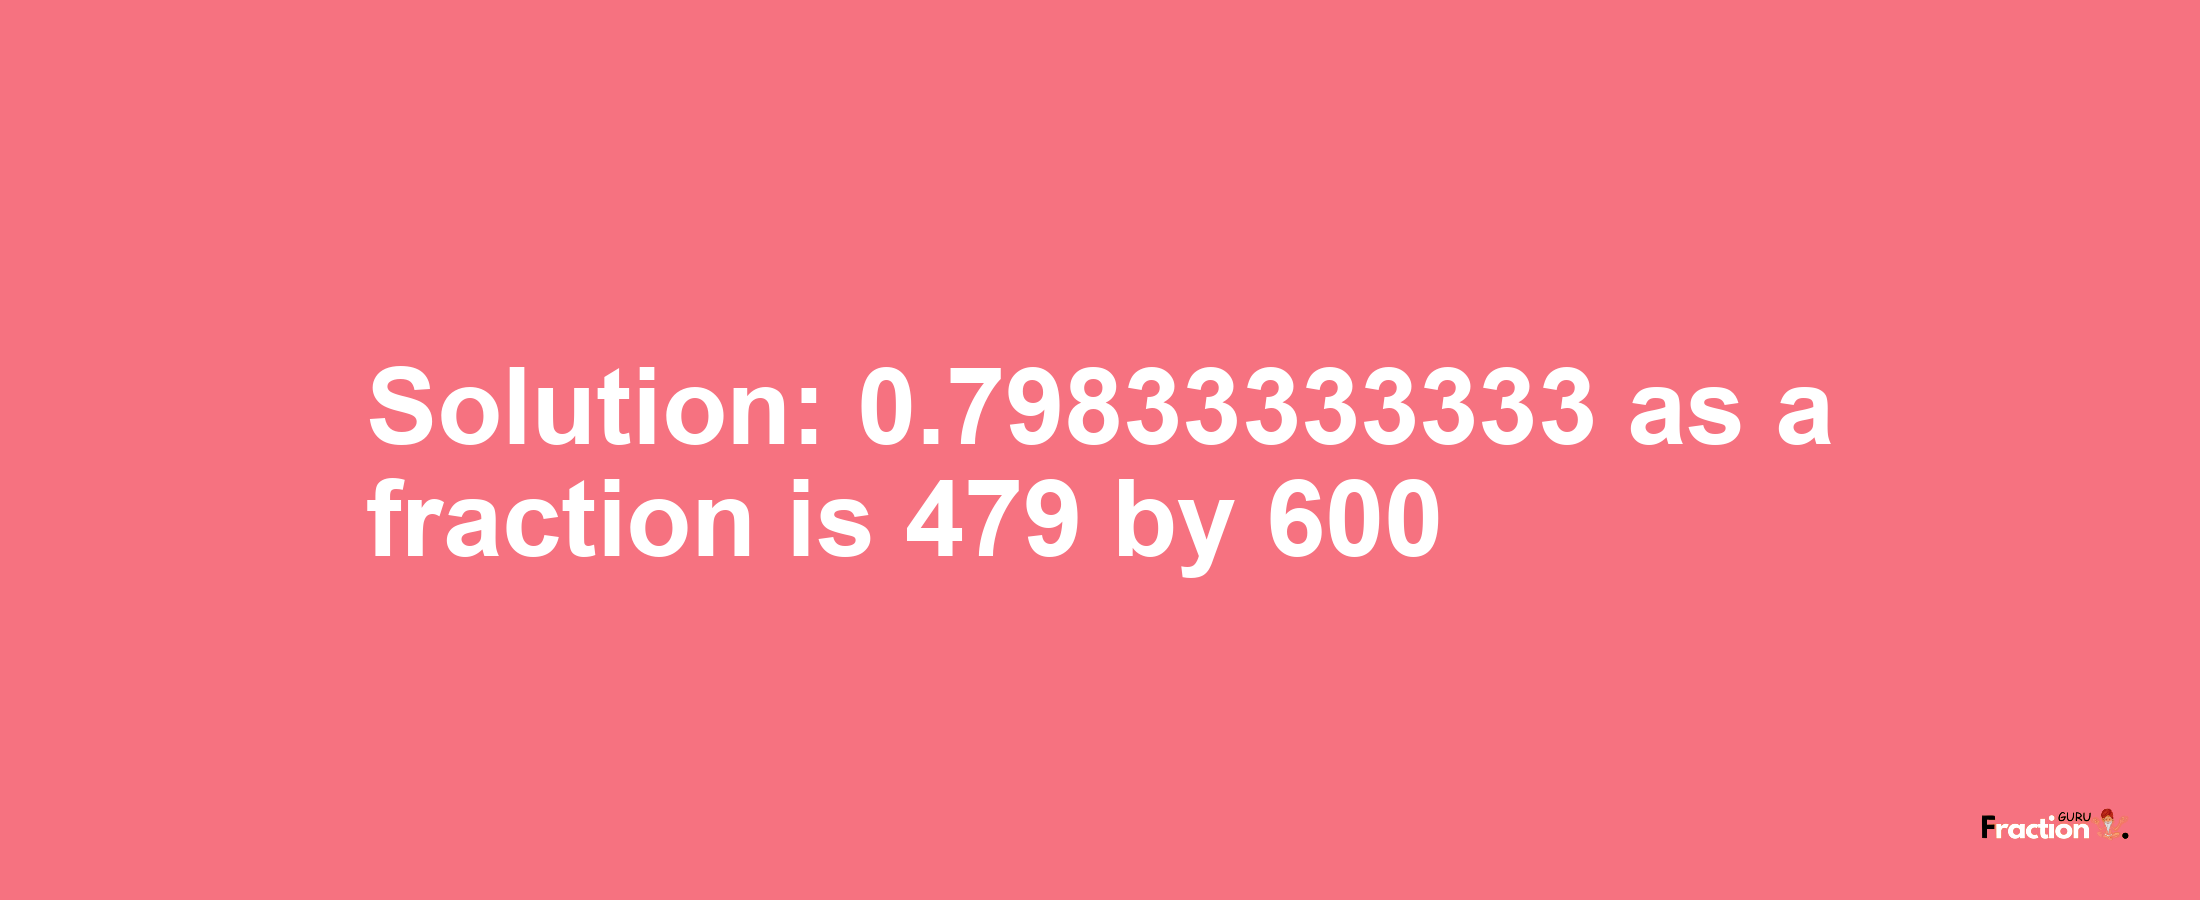 Solution:0.79833333333 as a fraction is 479/600